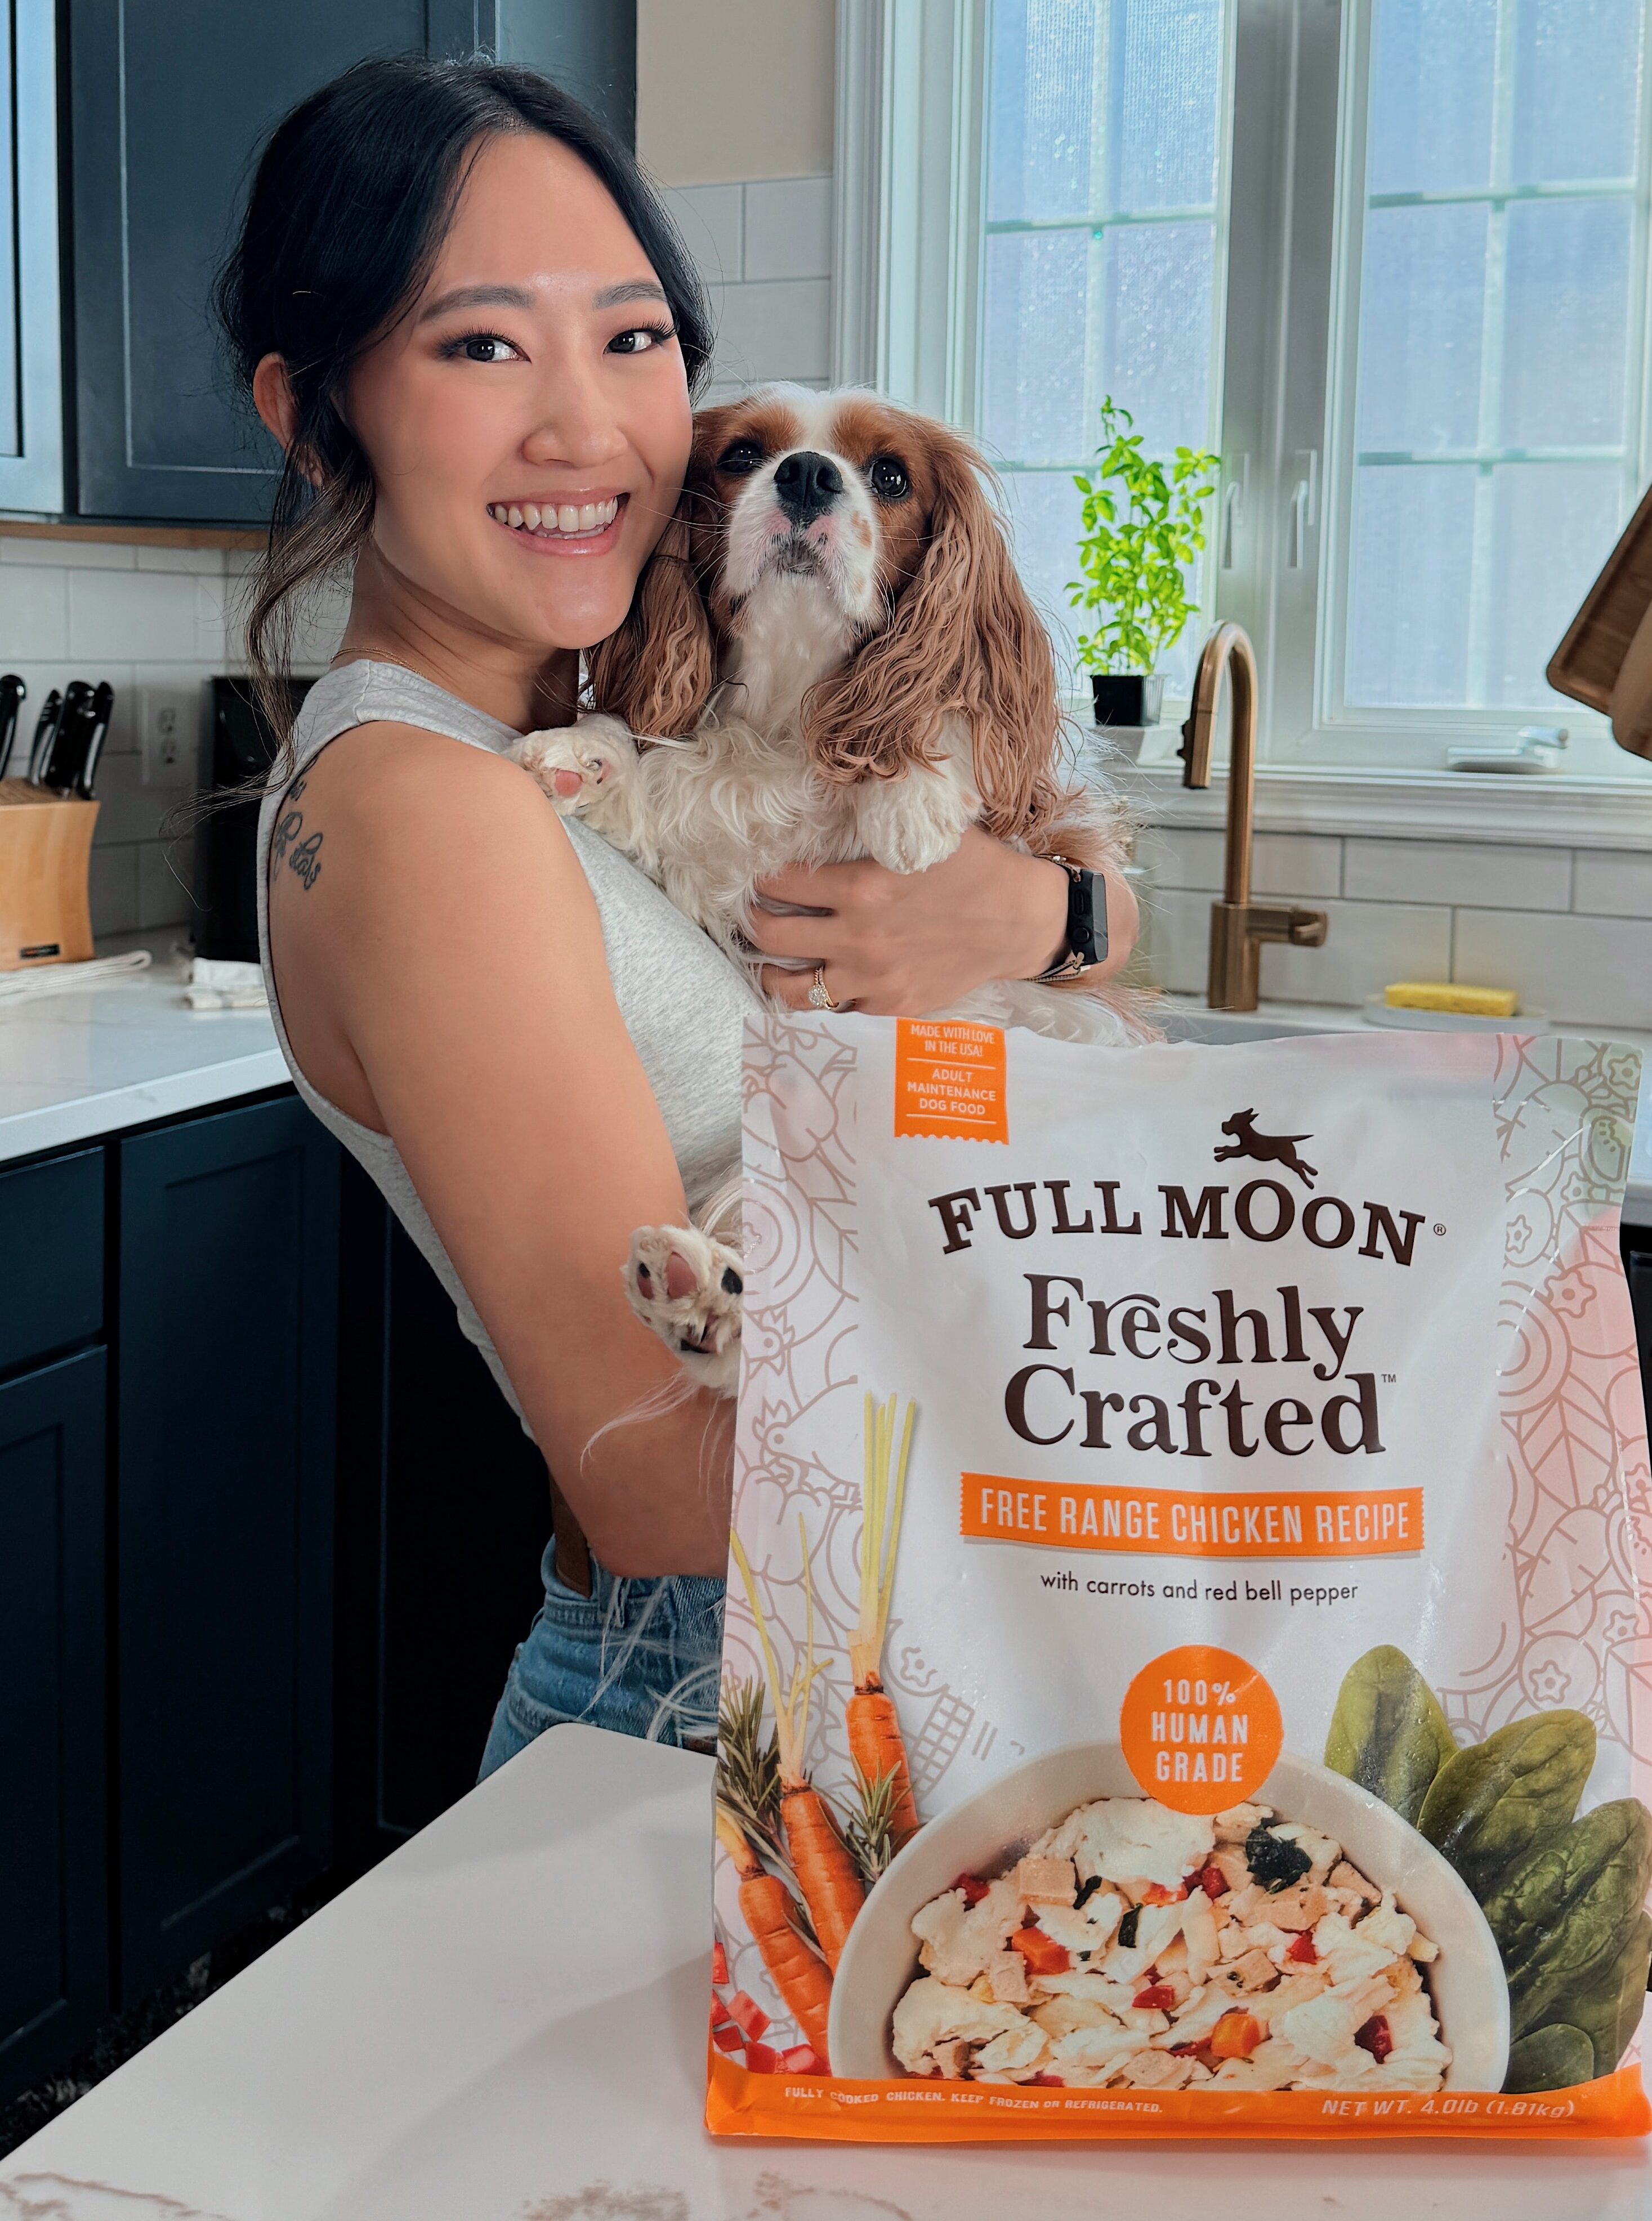 I Thought Human Grade Dog Food Was Just a Marketing Ploy – Now We Can’t Ever Go Back